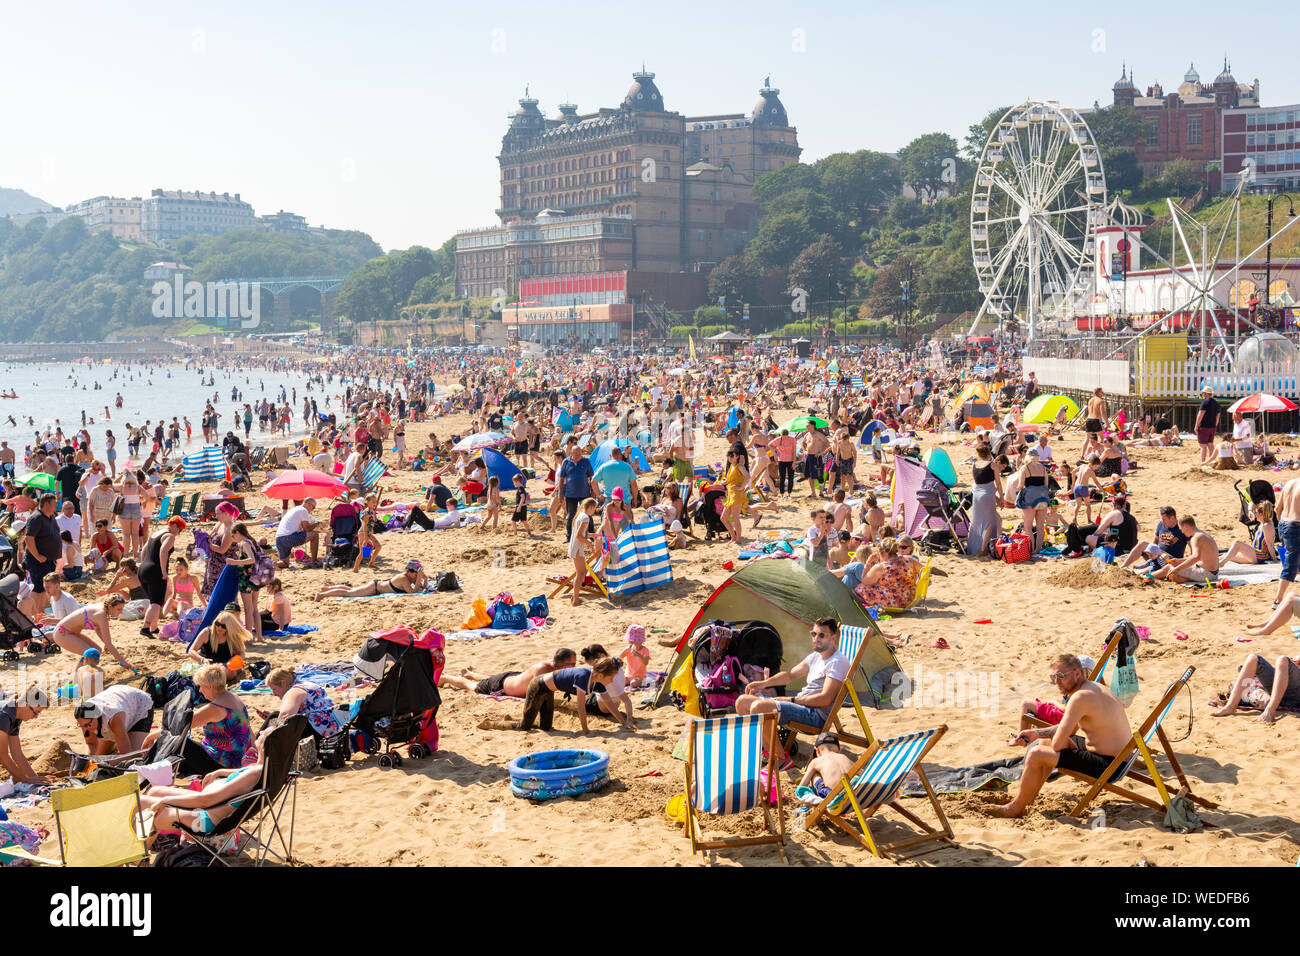 Crowds of people on the beach at South Bay, Scarborough, North Yorkshire, UK, during August bank holiday weekend heatwave, 2019. Stock Photo